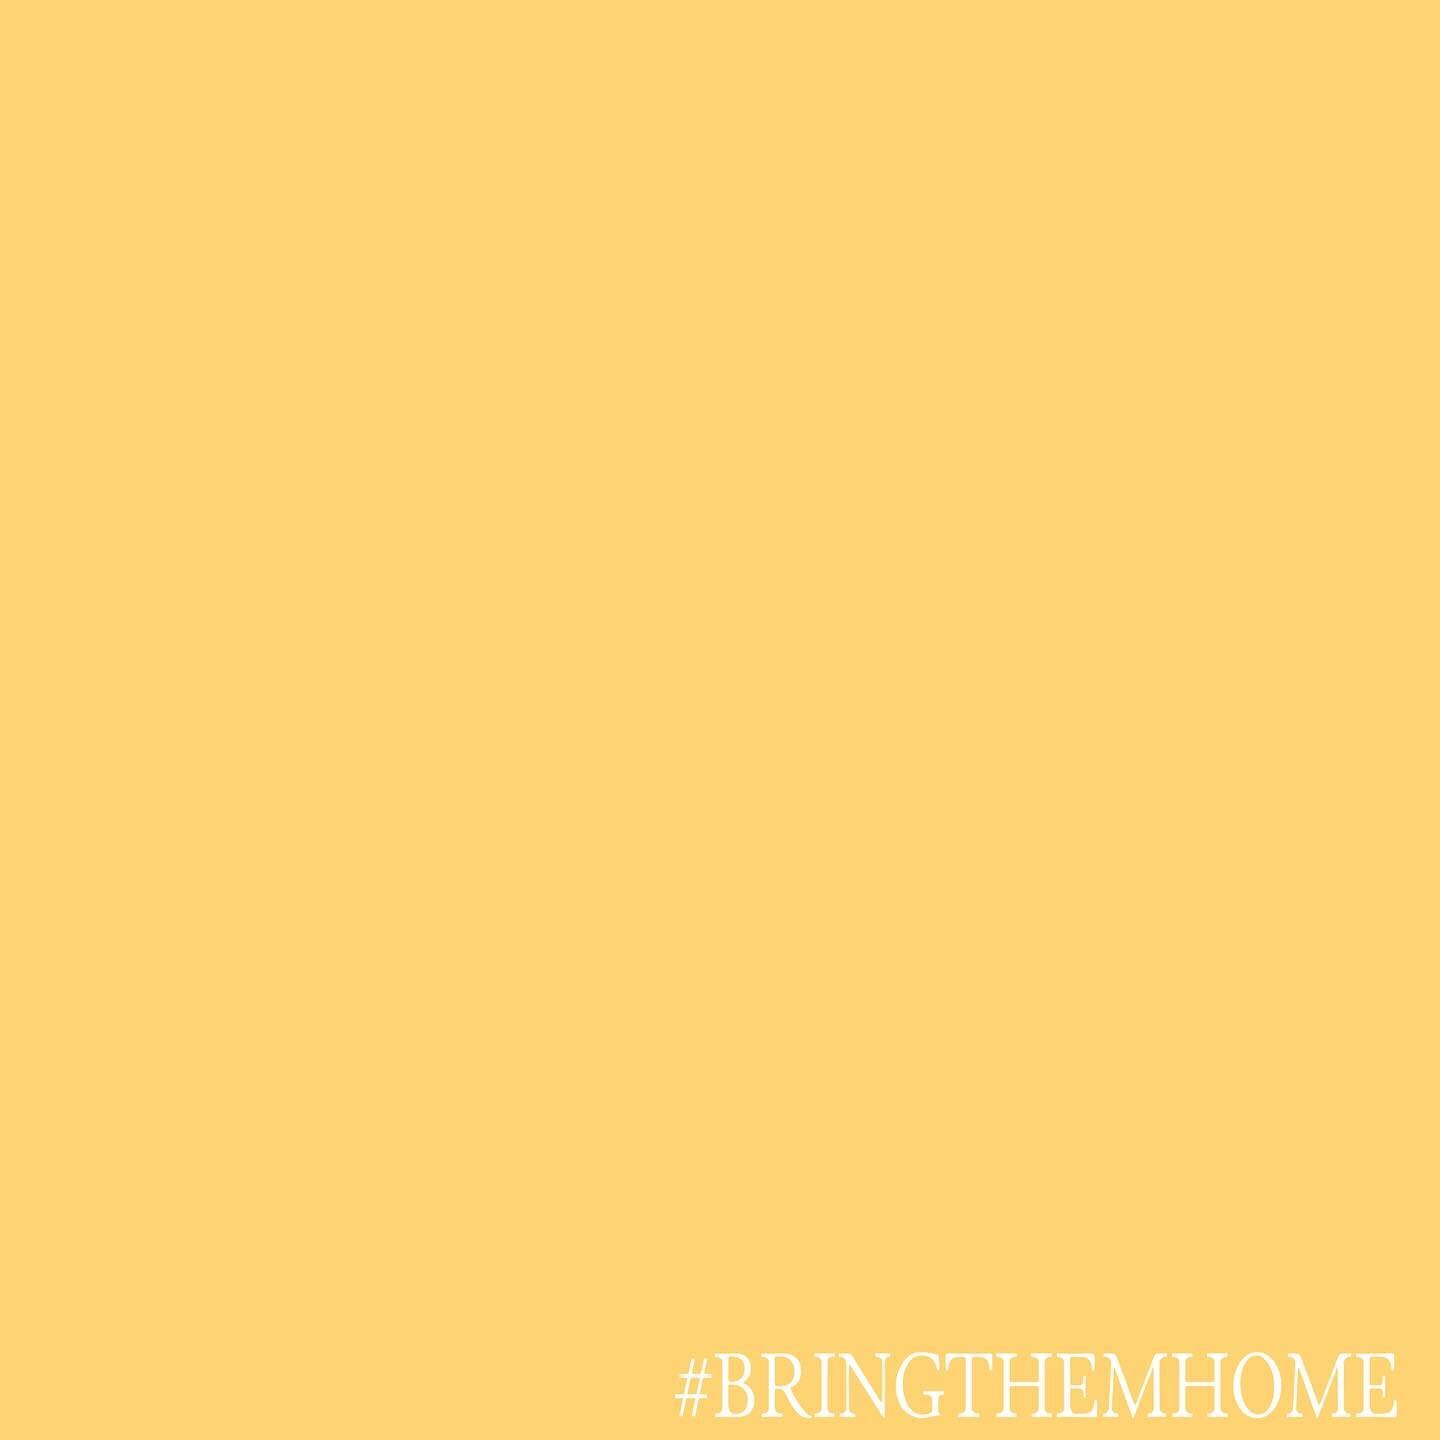 #BringThemHome 

Add a yellow square and show solidarity with everyone affected by this terrorism all over the world 🇮🇱